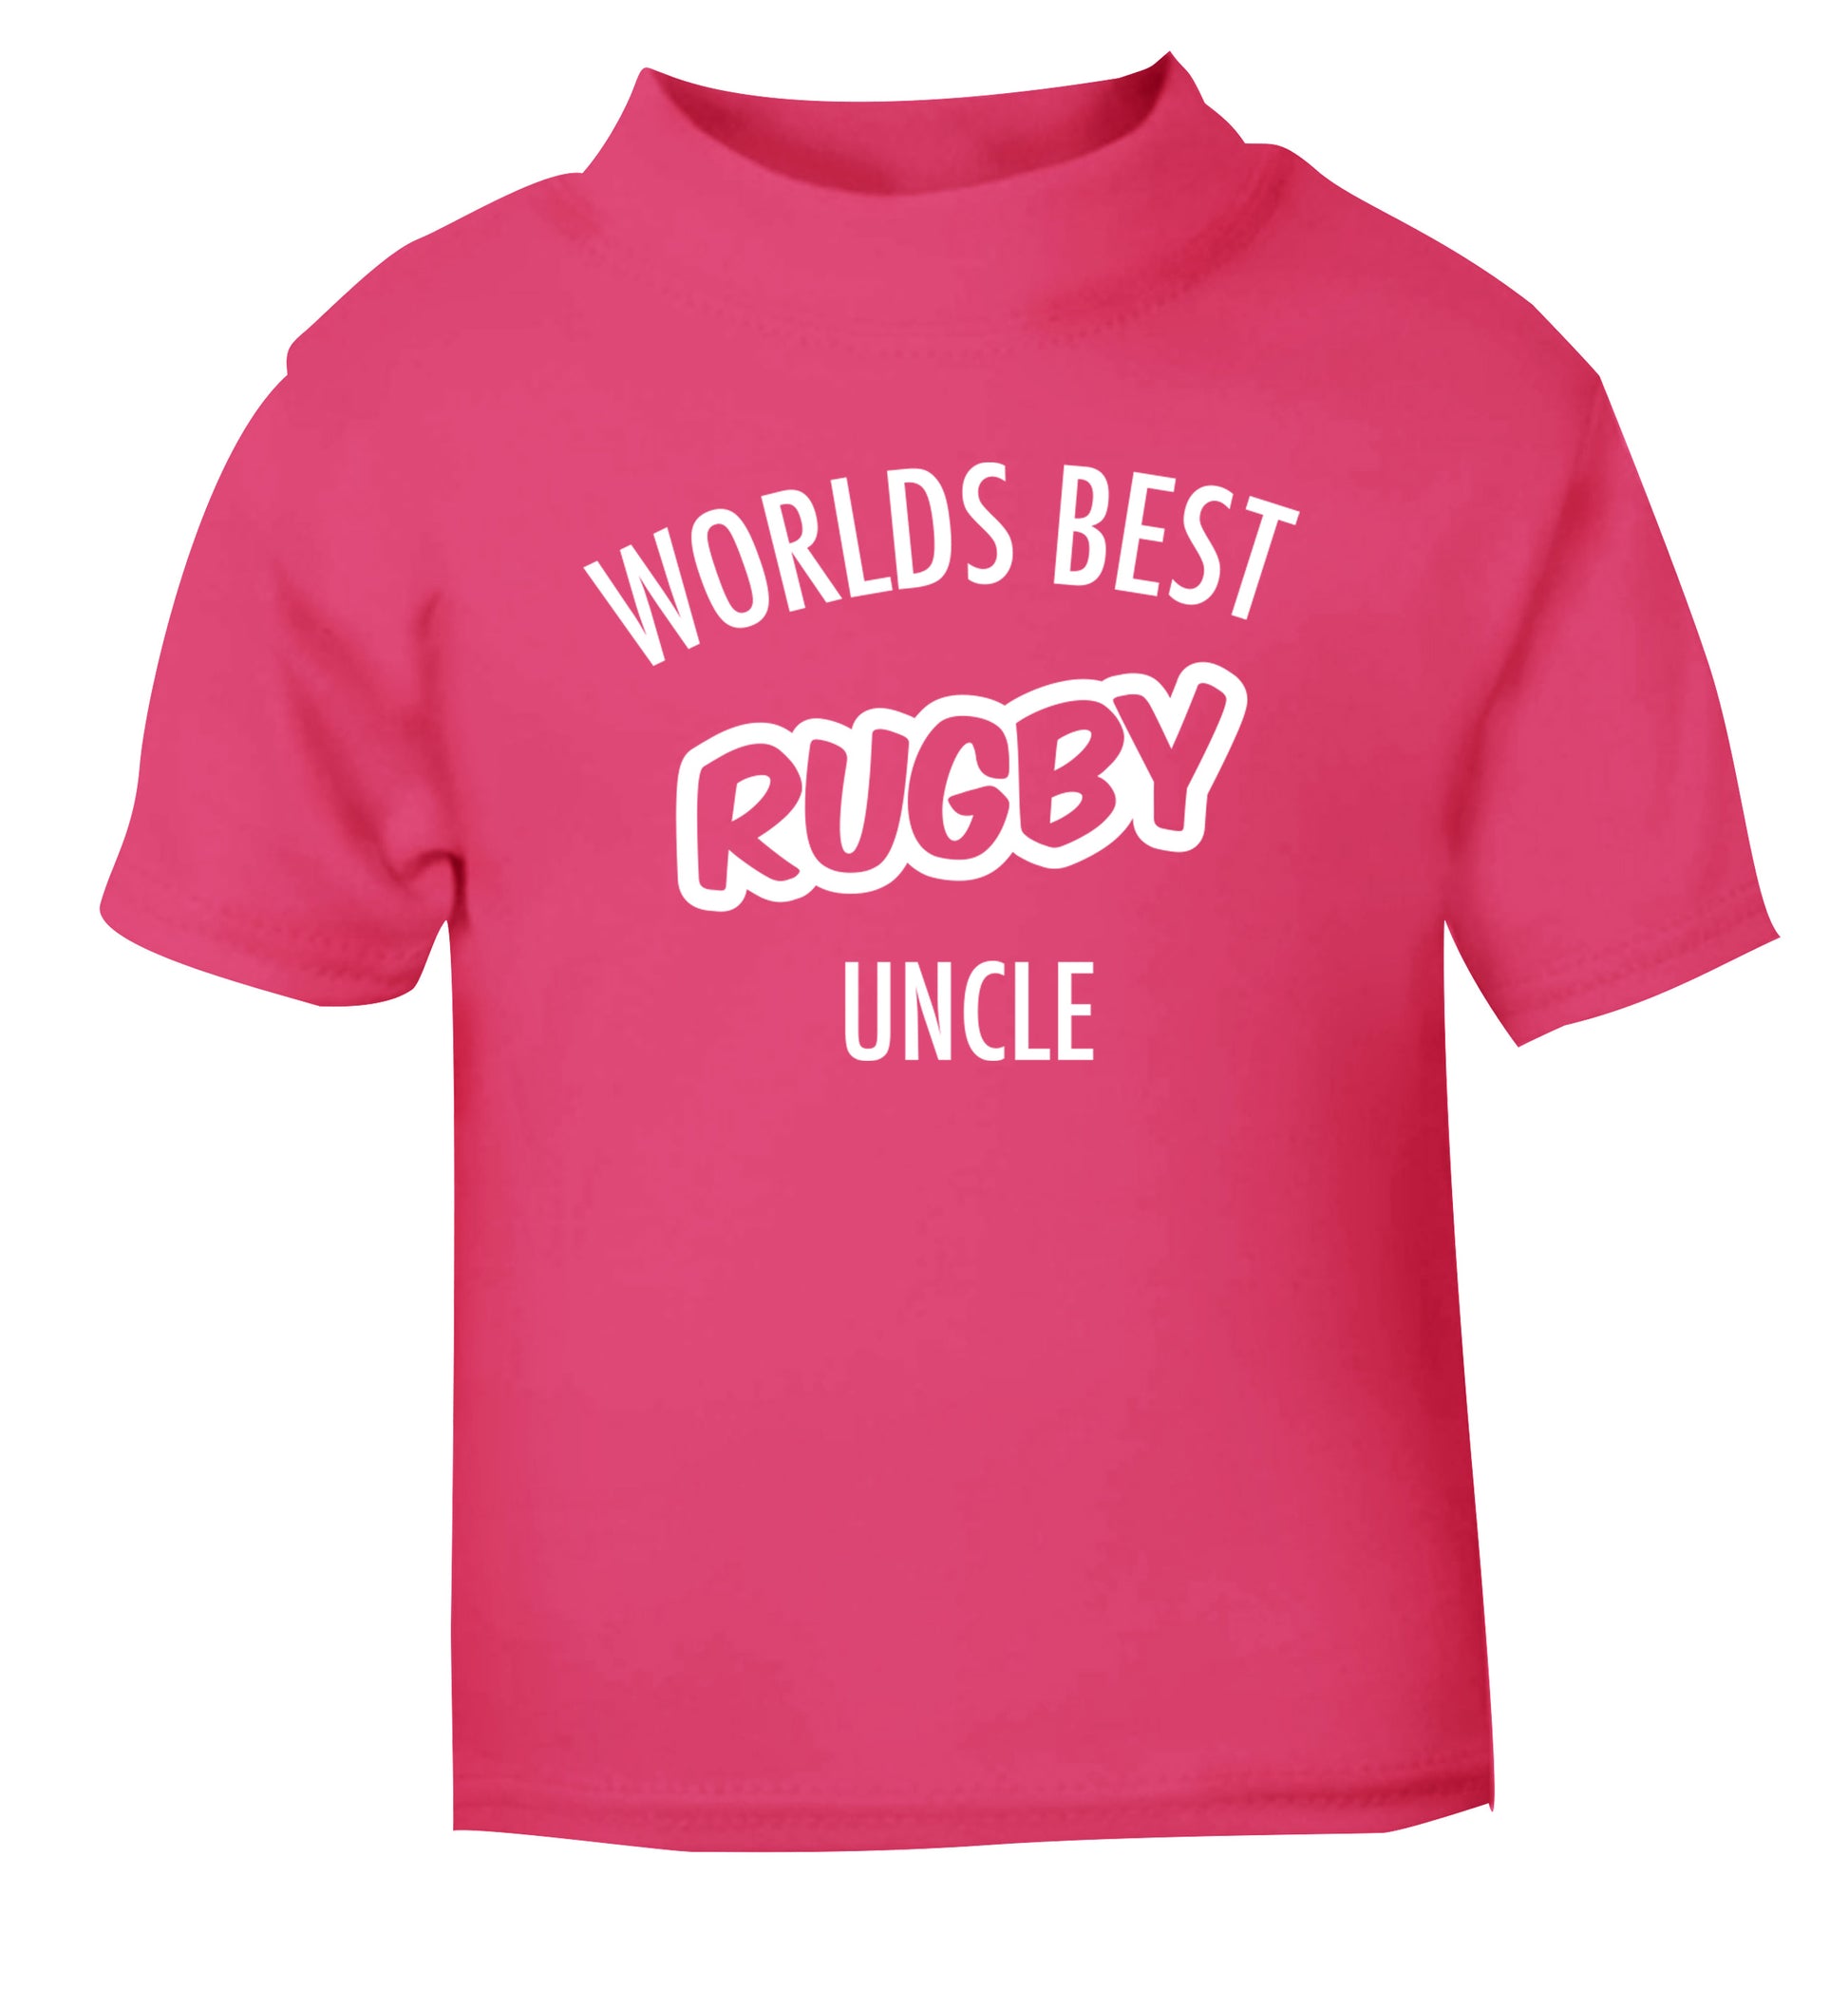 Worlds best rugby uncle pink Baby Toddler Tshirt 2 Years